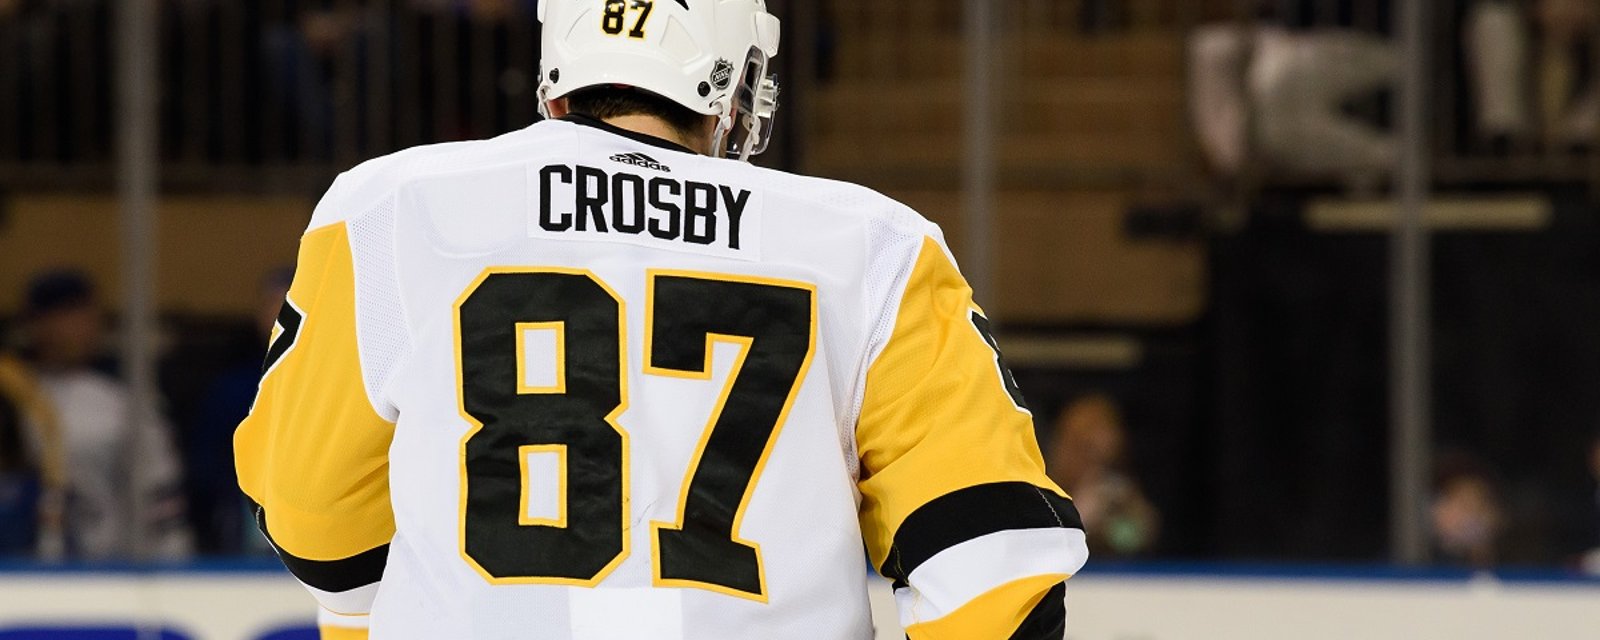 Sidney Crosby returns to practice for the first time since wrist surgery.